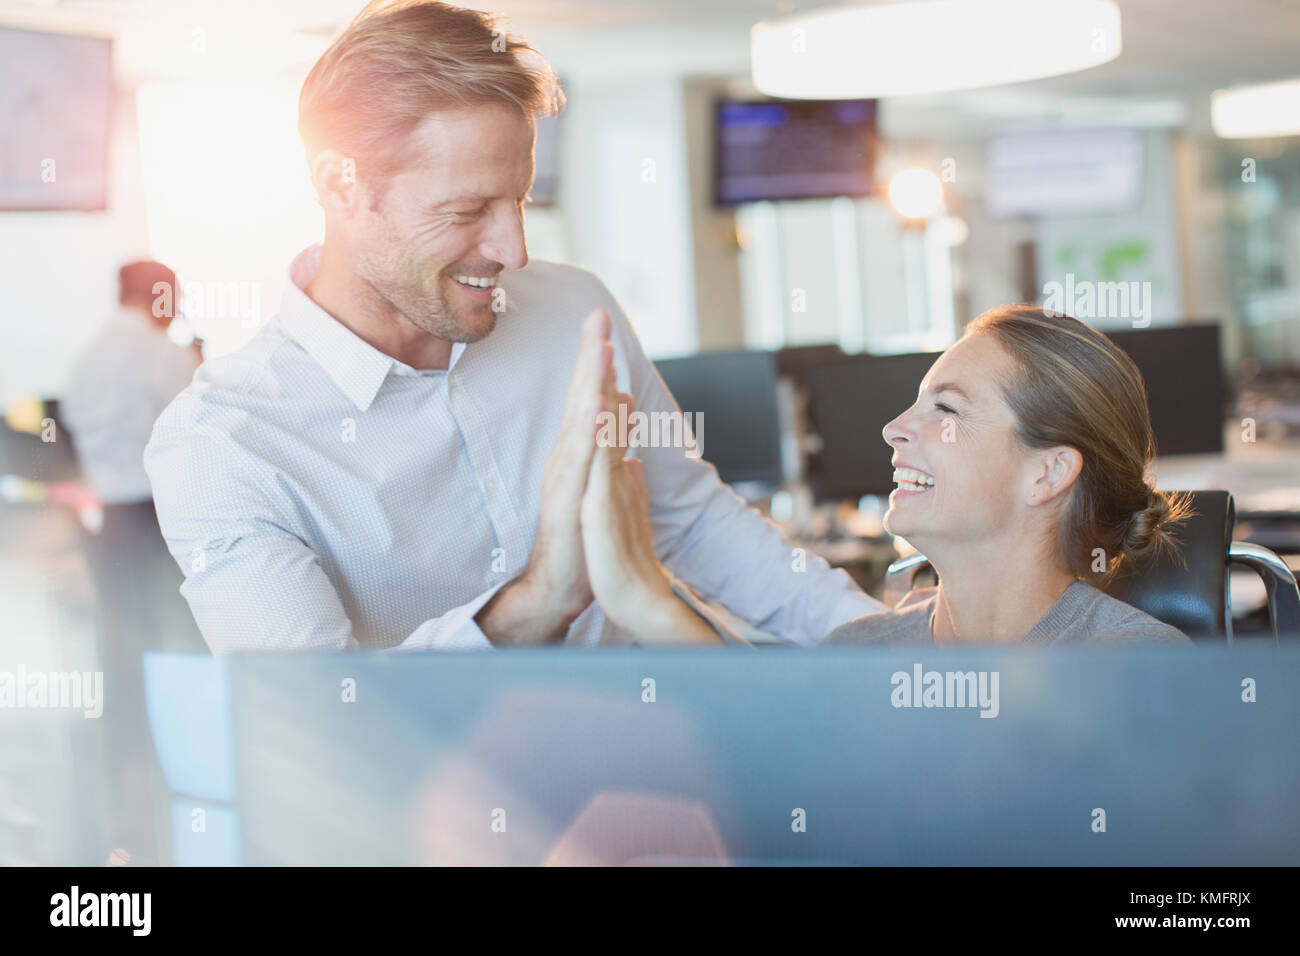 Businessman and businesswoman high-fiving at computer in office Stock Photo